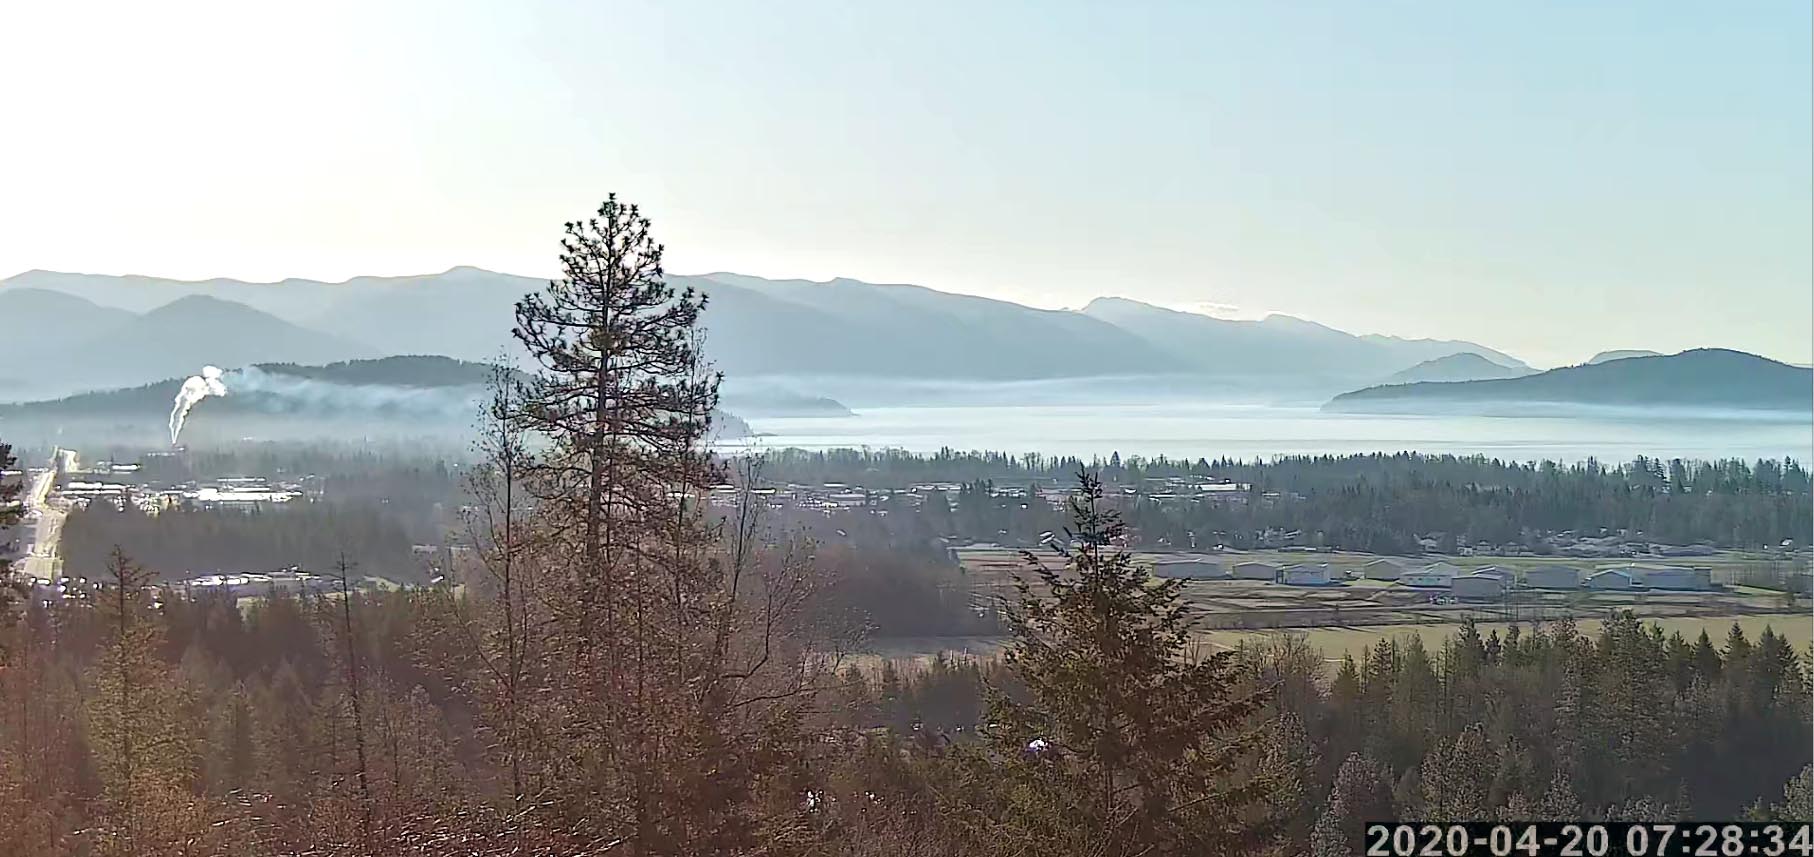 Lignetics of Kootenai Idaho polluting the air in the Sandpoint area and Lake Pend Oreille